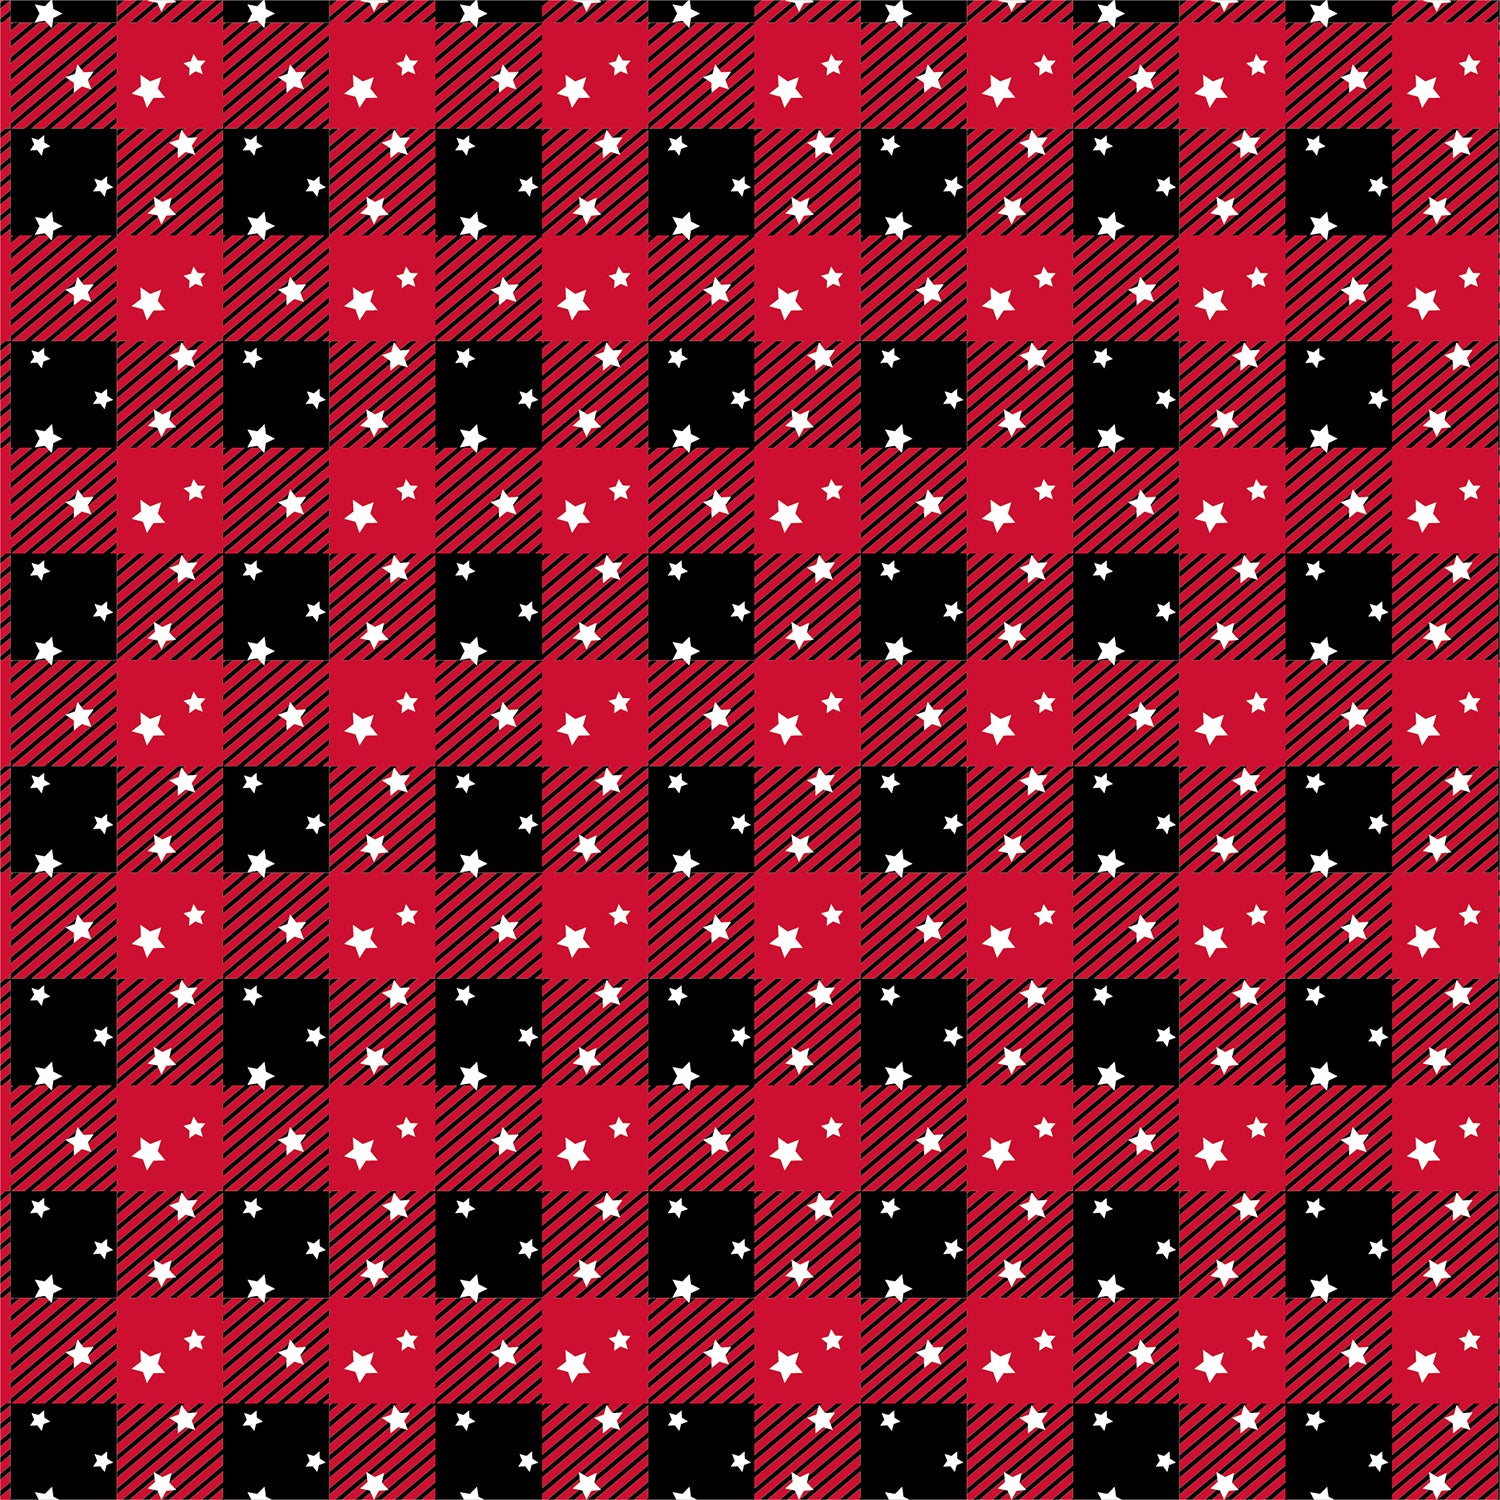 Red and Black Buffalo Grid Snowflake Flat Wrapping Paper Sheet Wholesale Wraphaholic